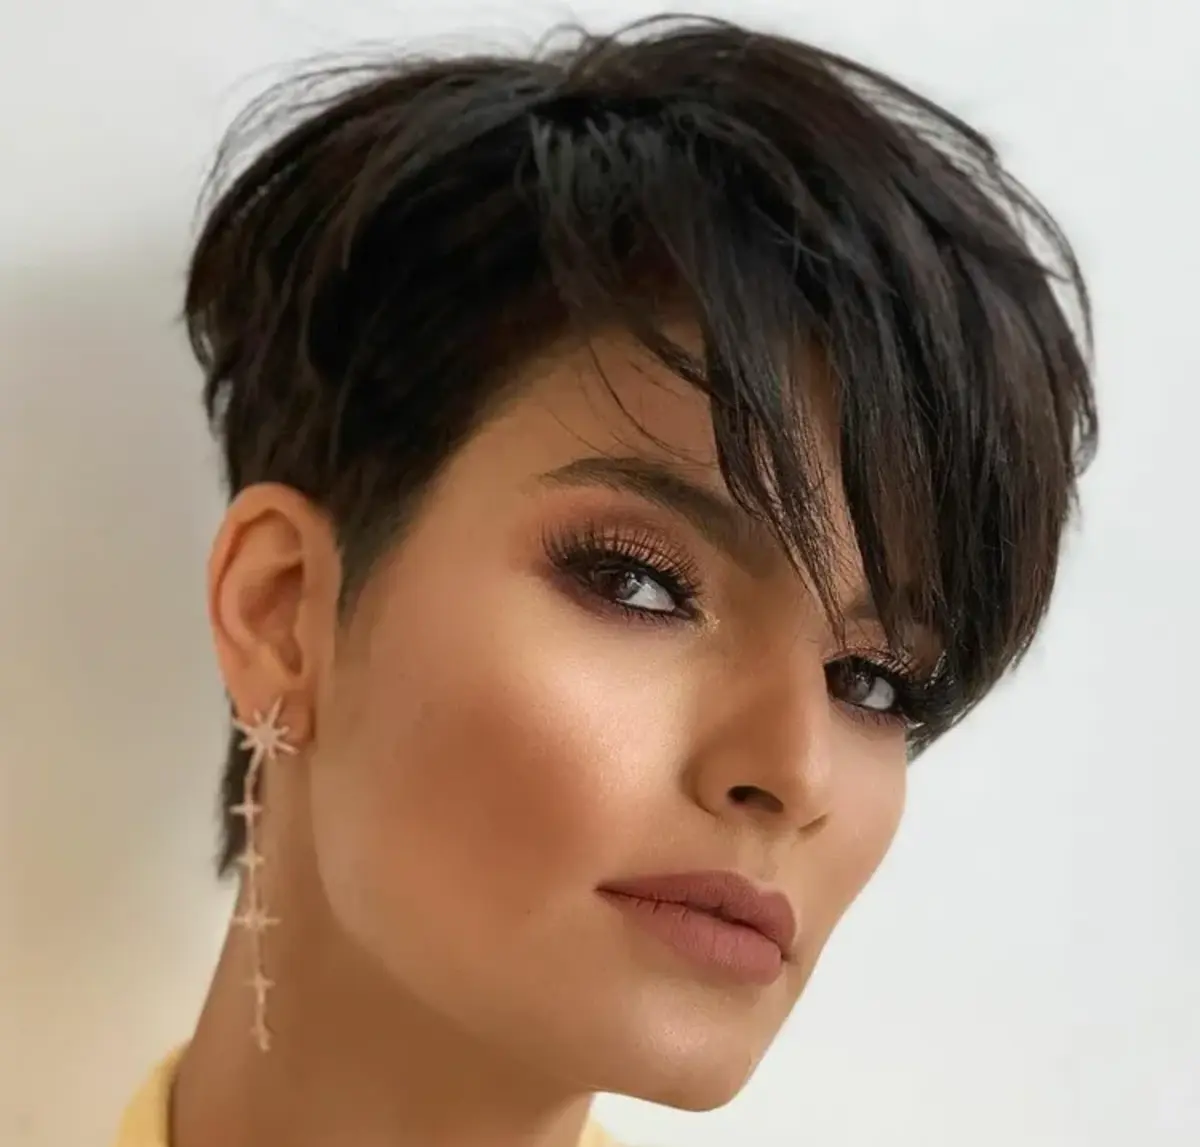 dark-haired woman with pixie cut and long bangs how to get this cut